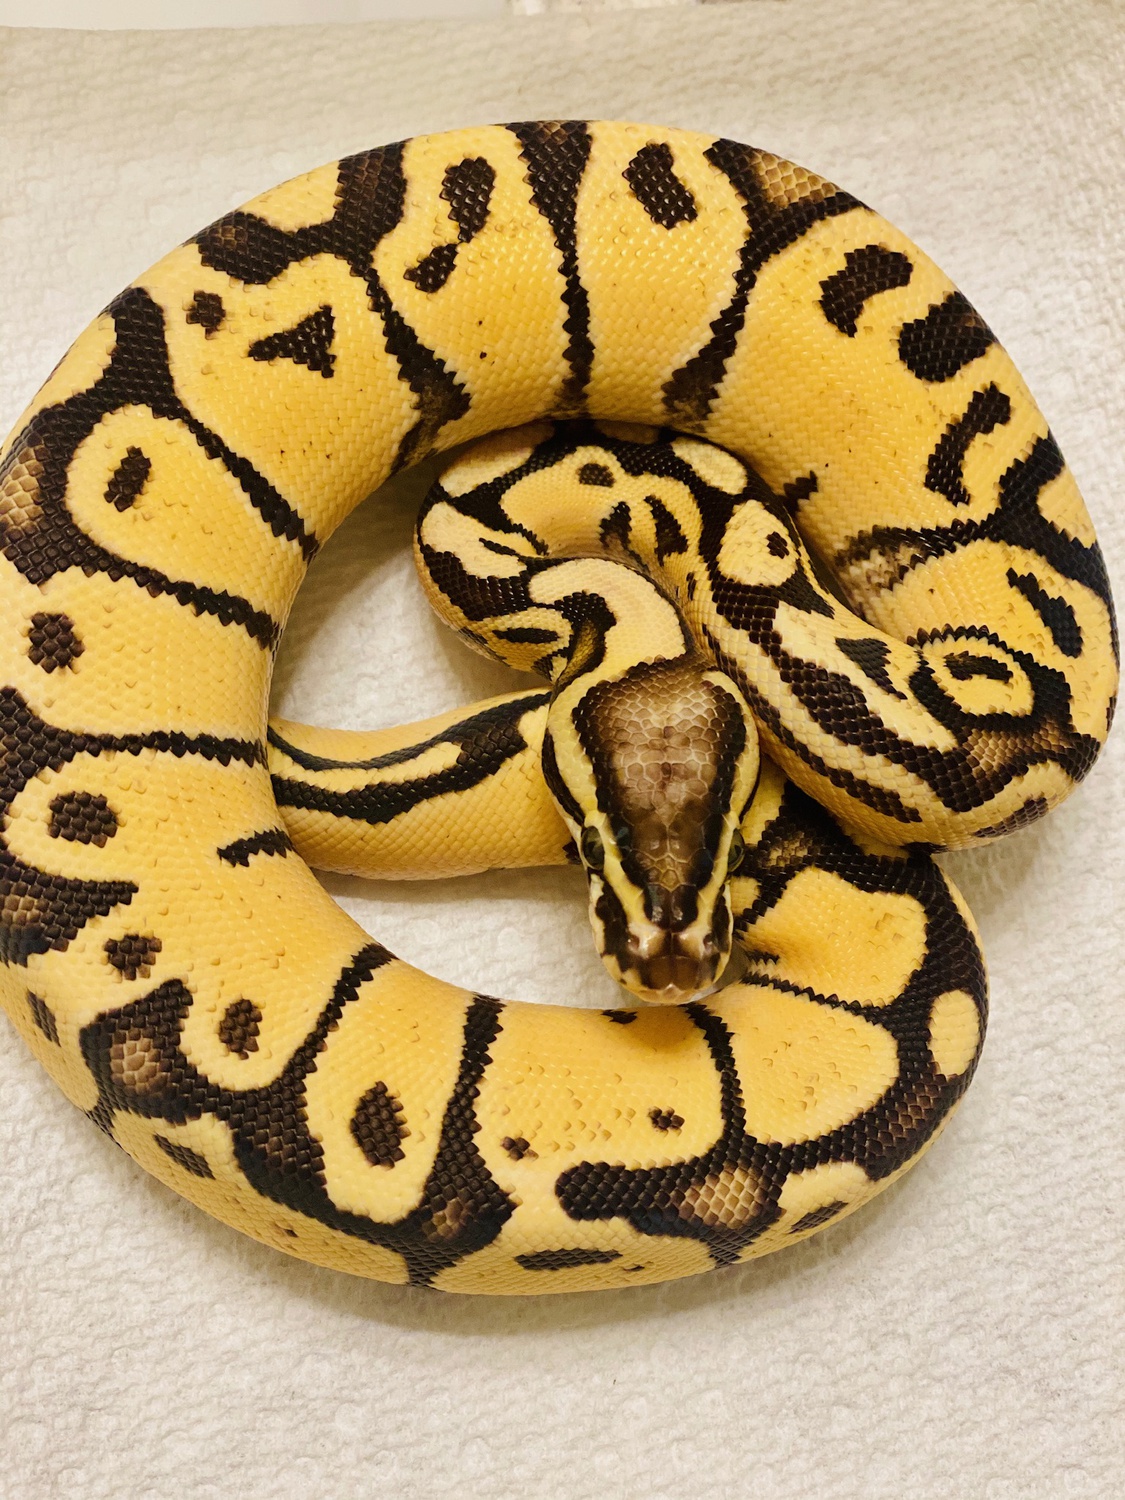 Mario Fire Pastel Ball Python by Exotic Reptiles R’Us